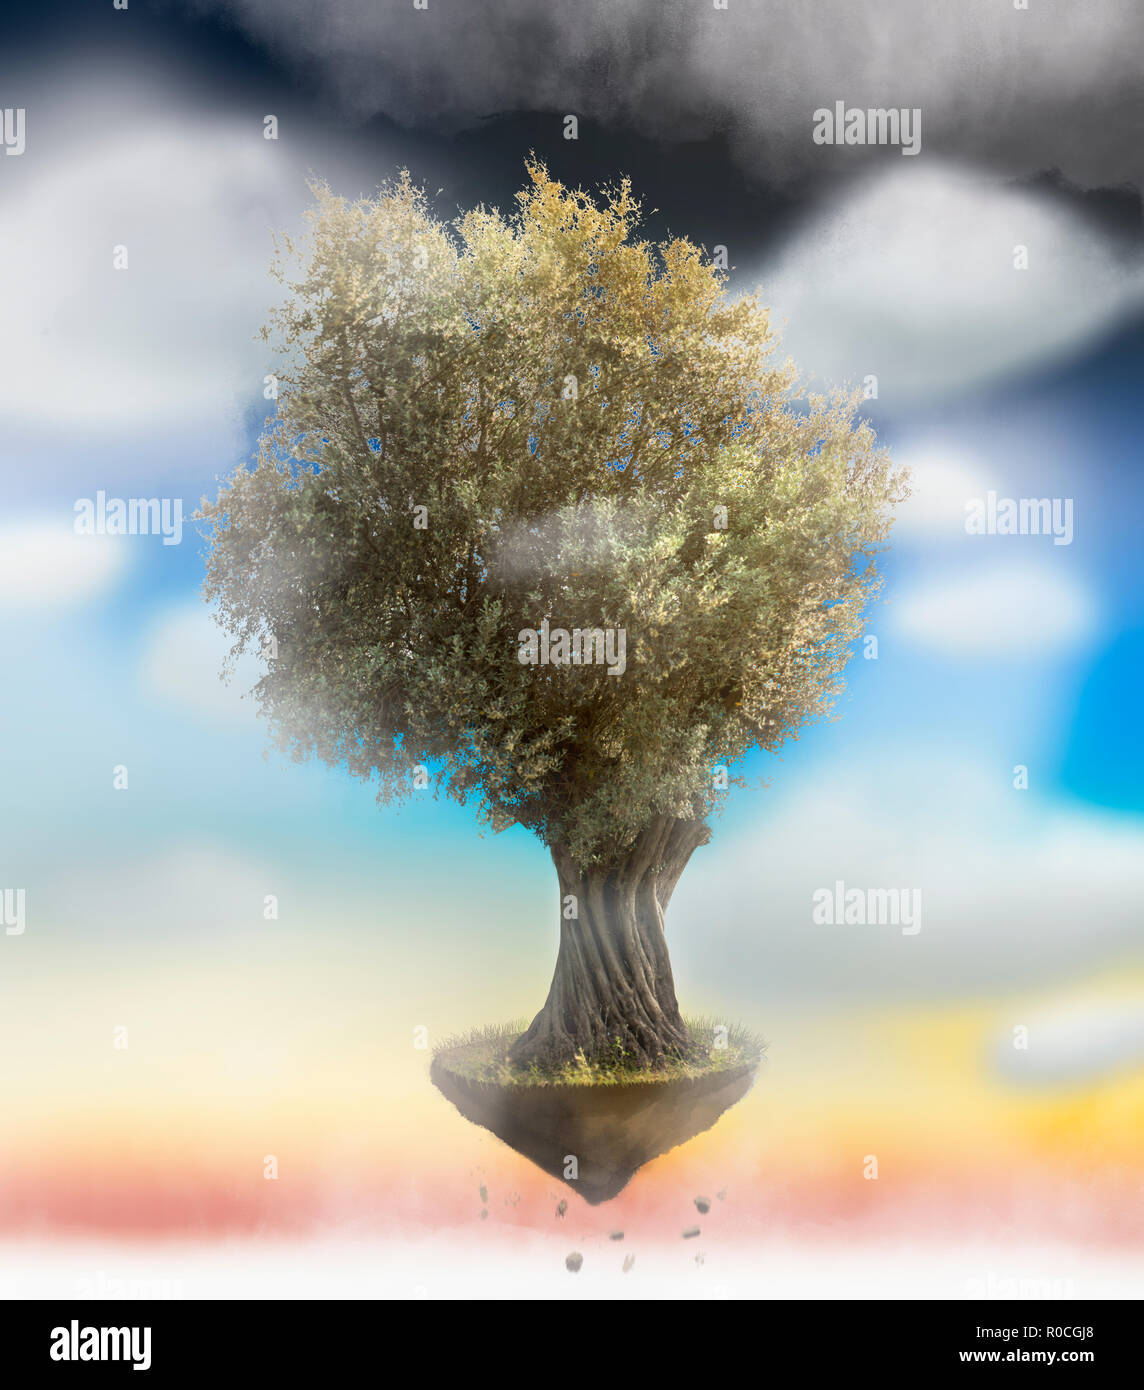 Olive tree isolated on a blue sky with clouds. Stock Photo